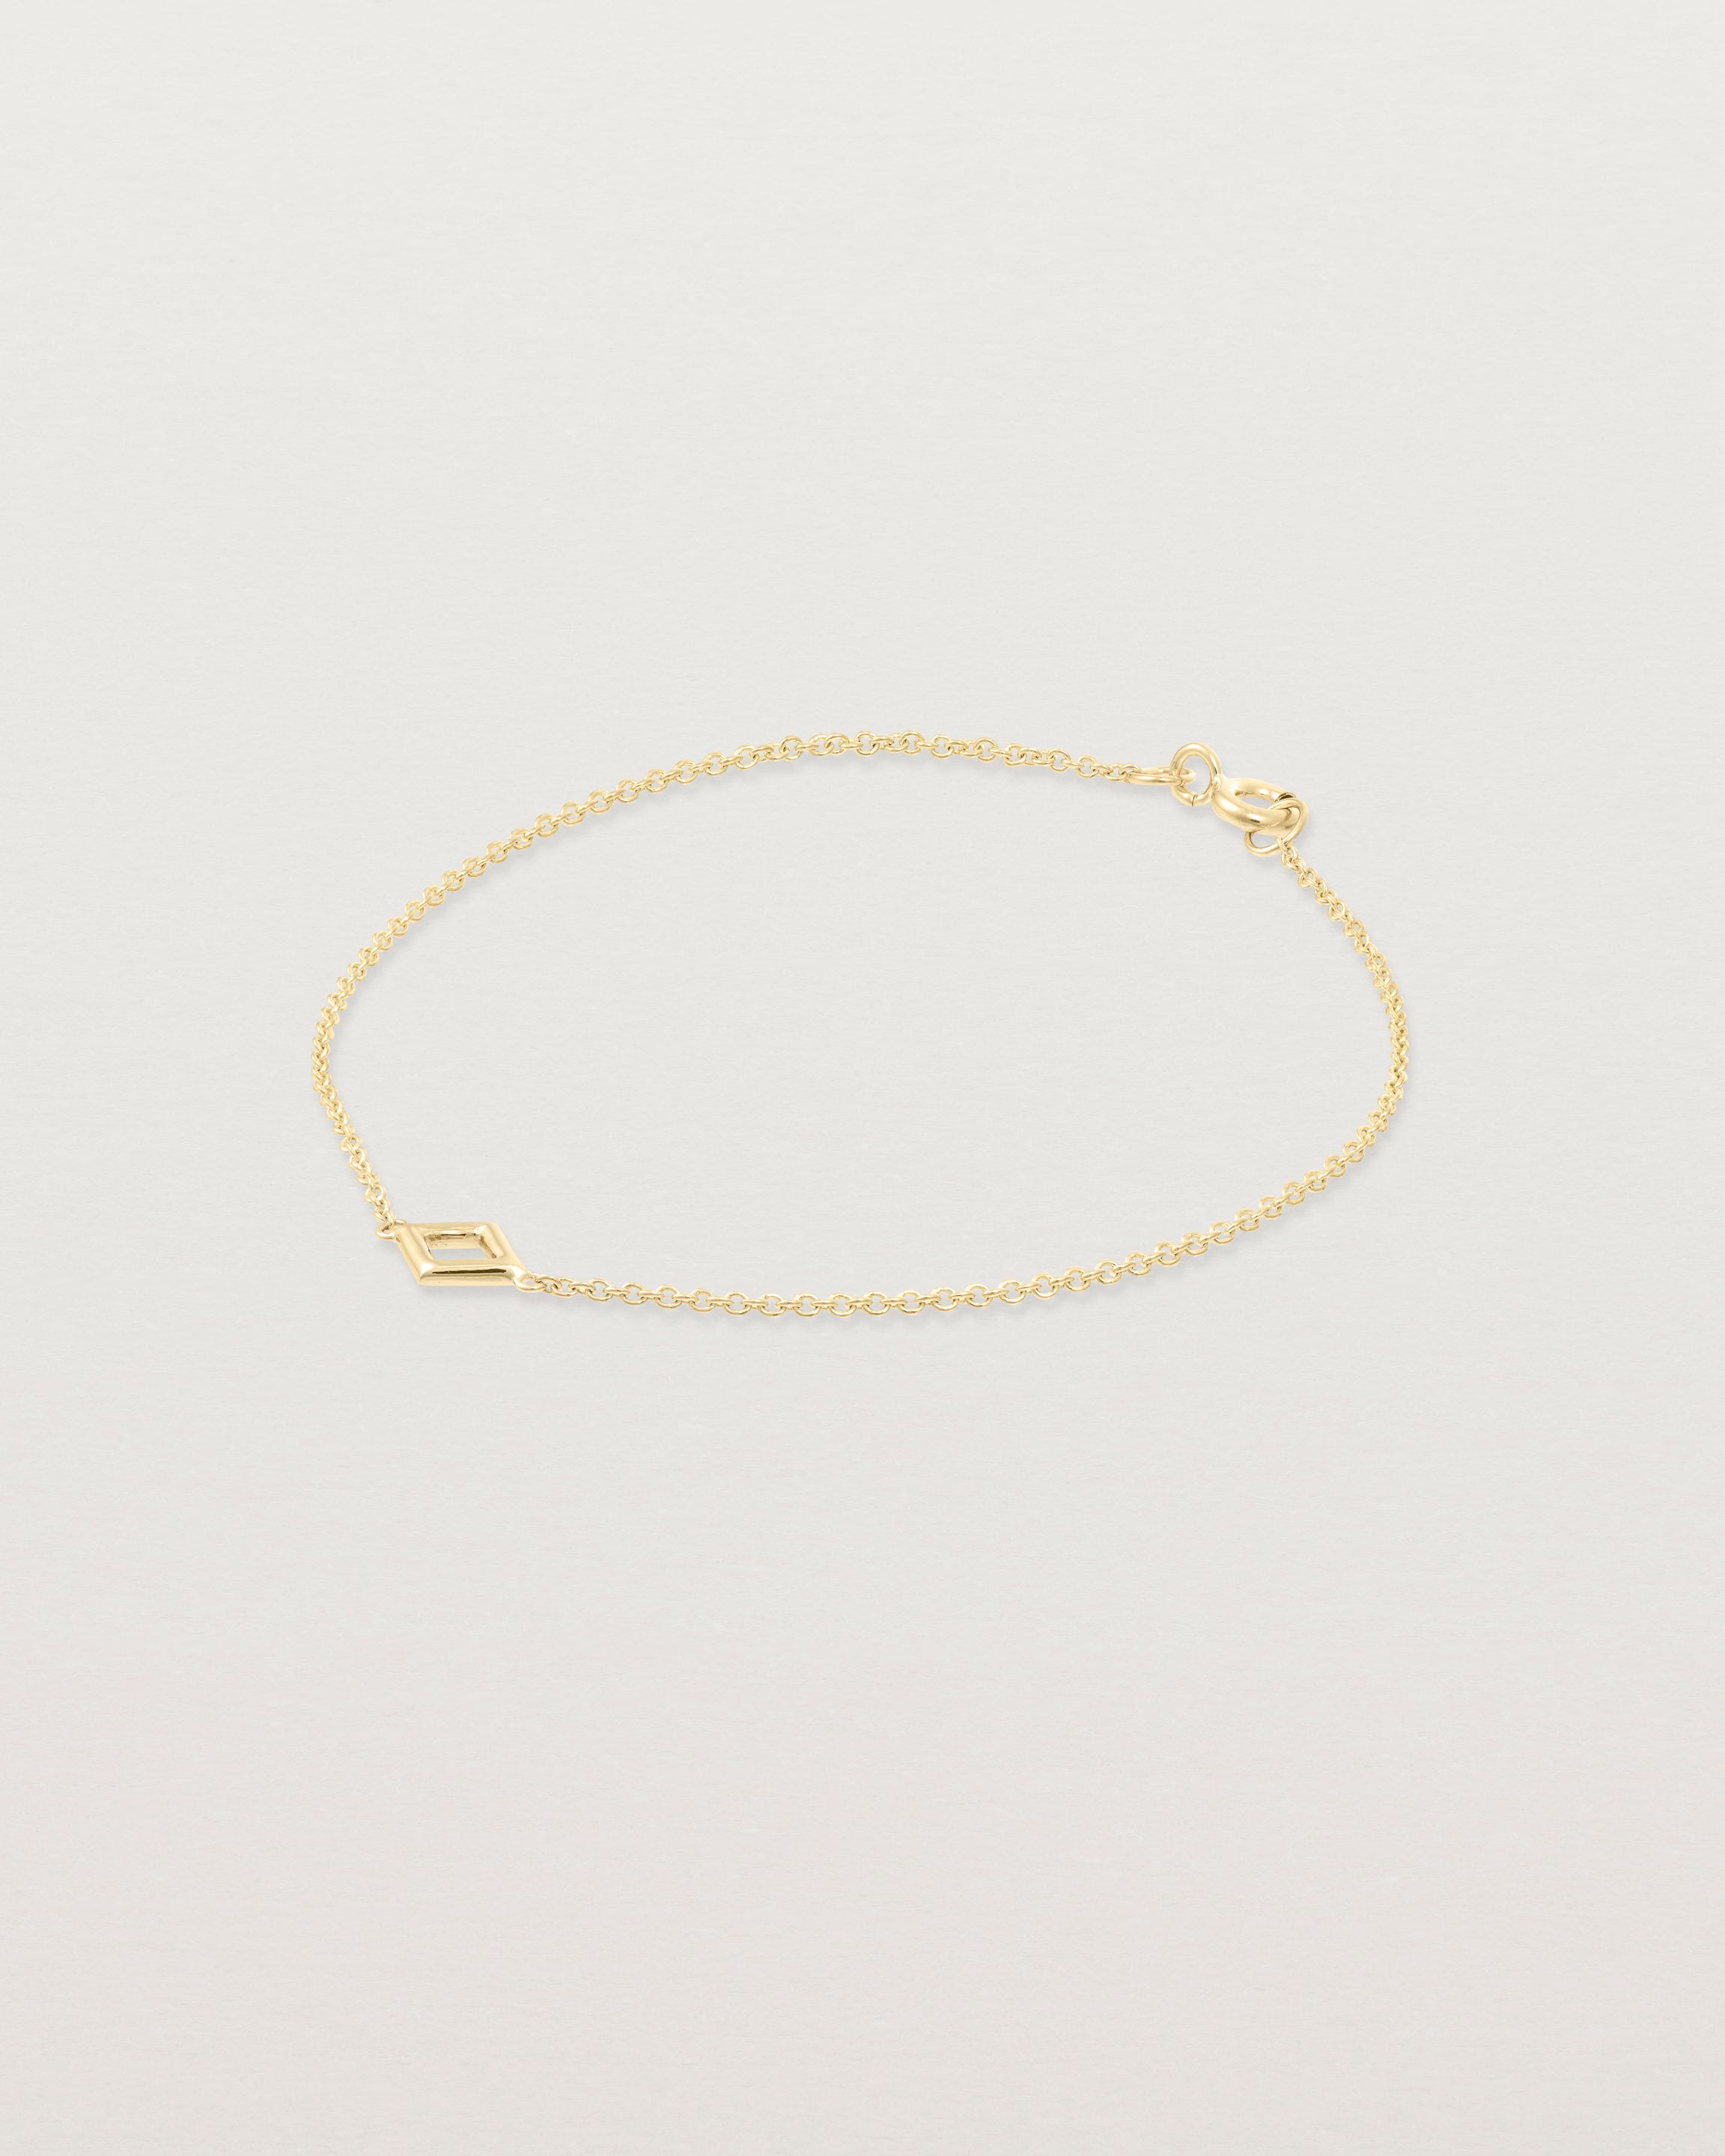 Front view of the Nuna Bracelet in yellow gold.